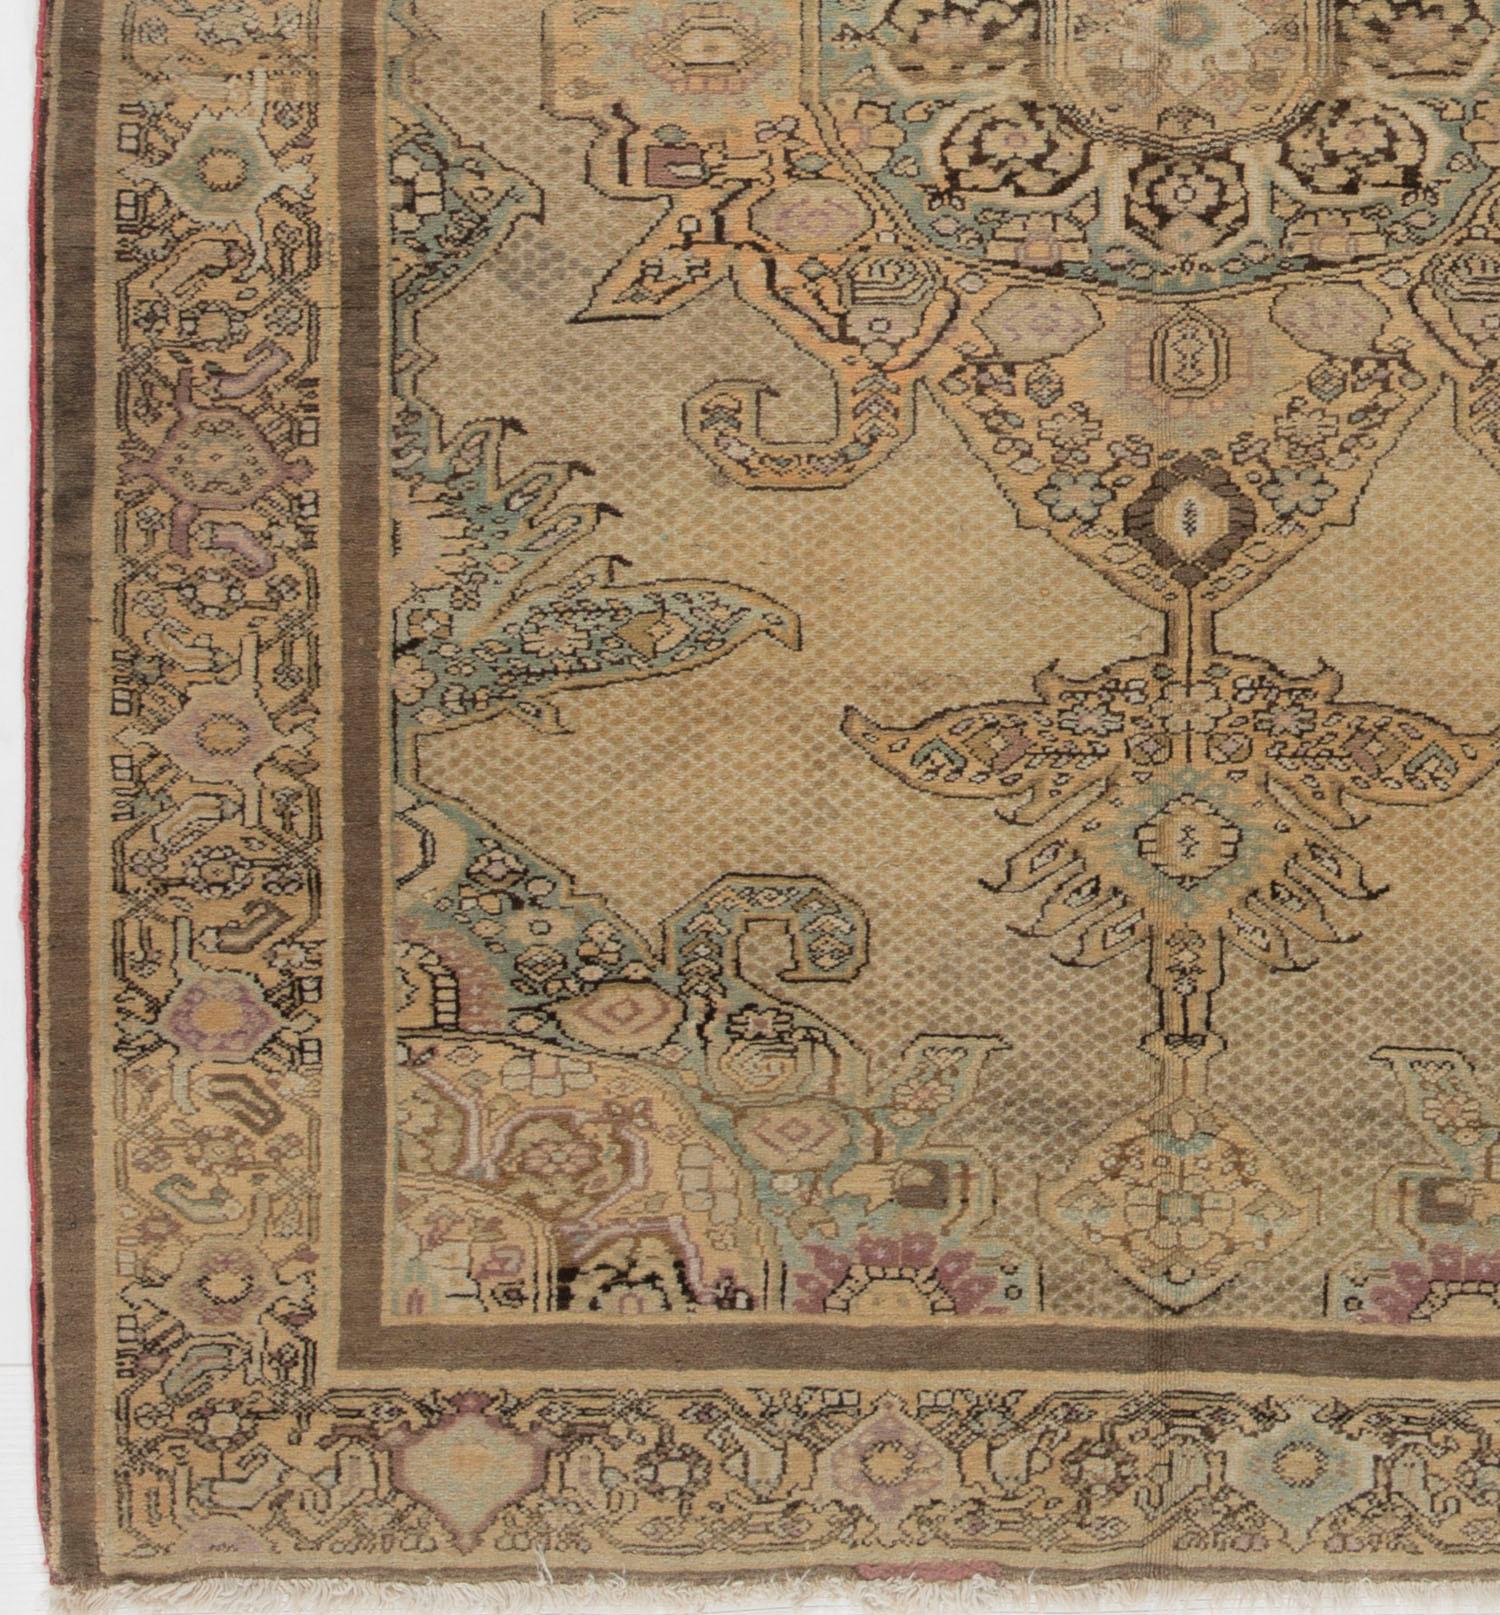 Finely woven antique Persian Malayer rug, circa 1900. This finely woven piece has exceptional velvety wool with a low pile. The pattern of a central medallion with curved bird head projections is repeated in quarters in the corners. This is really a